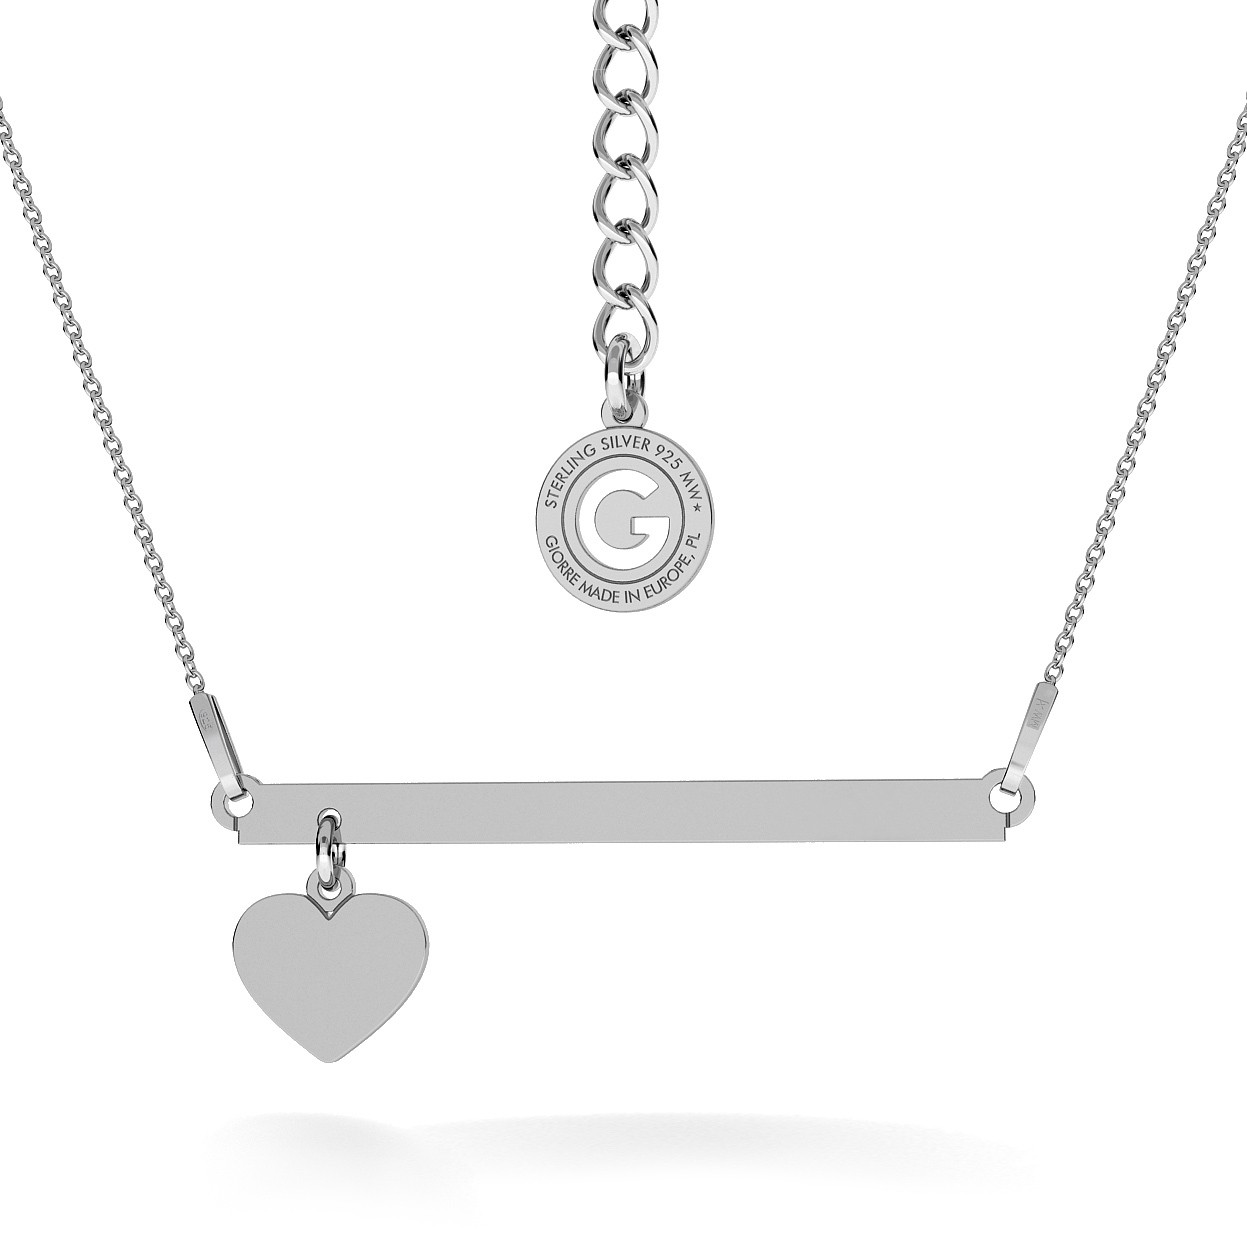 NECKLACE WITH HEART & RECTANGLE BAR, YOUR ENGRAVE, RHODIUM OR 24K / 18K GOLD PLATED